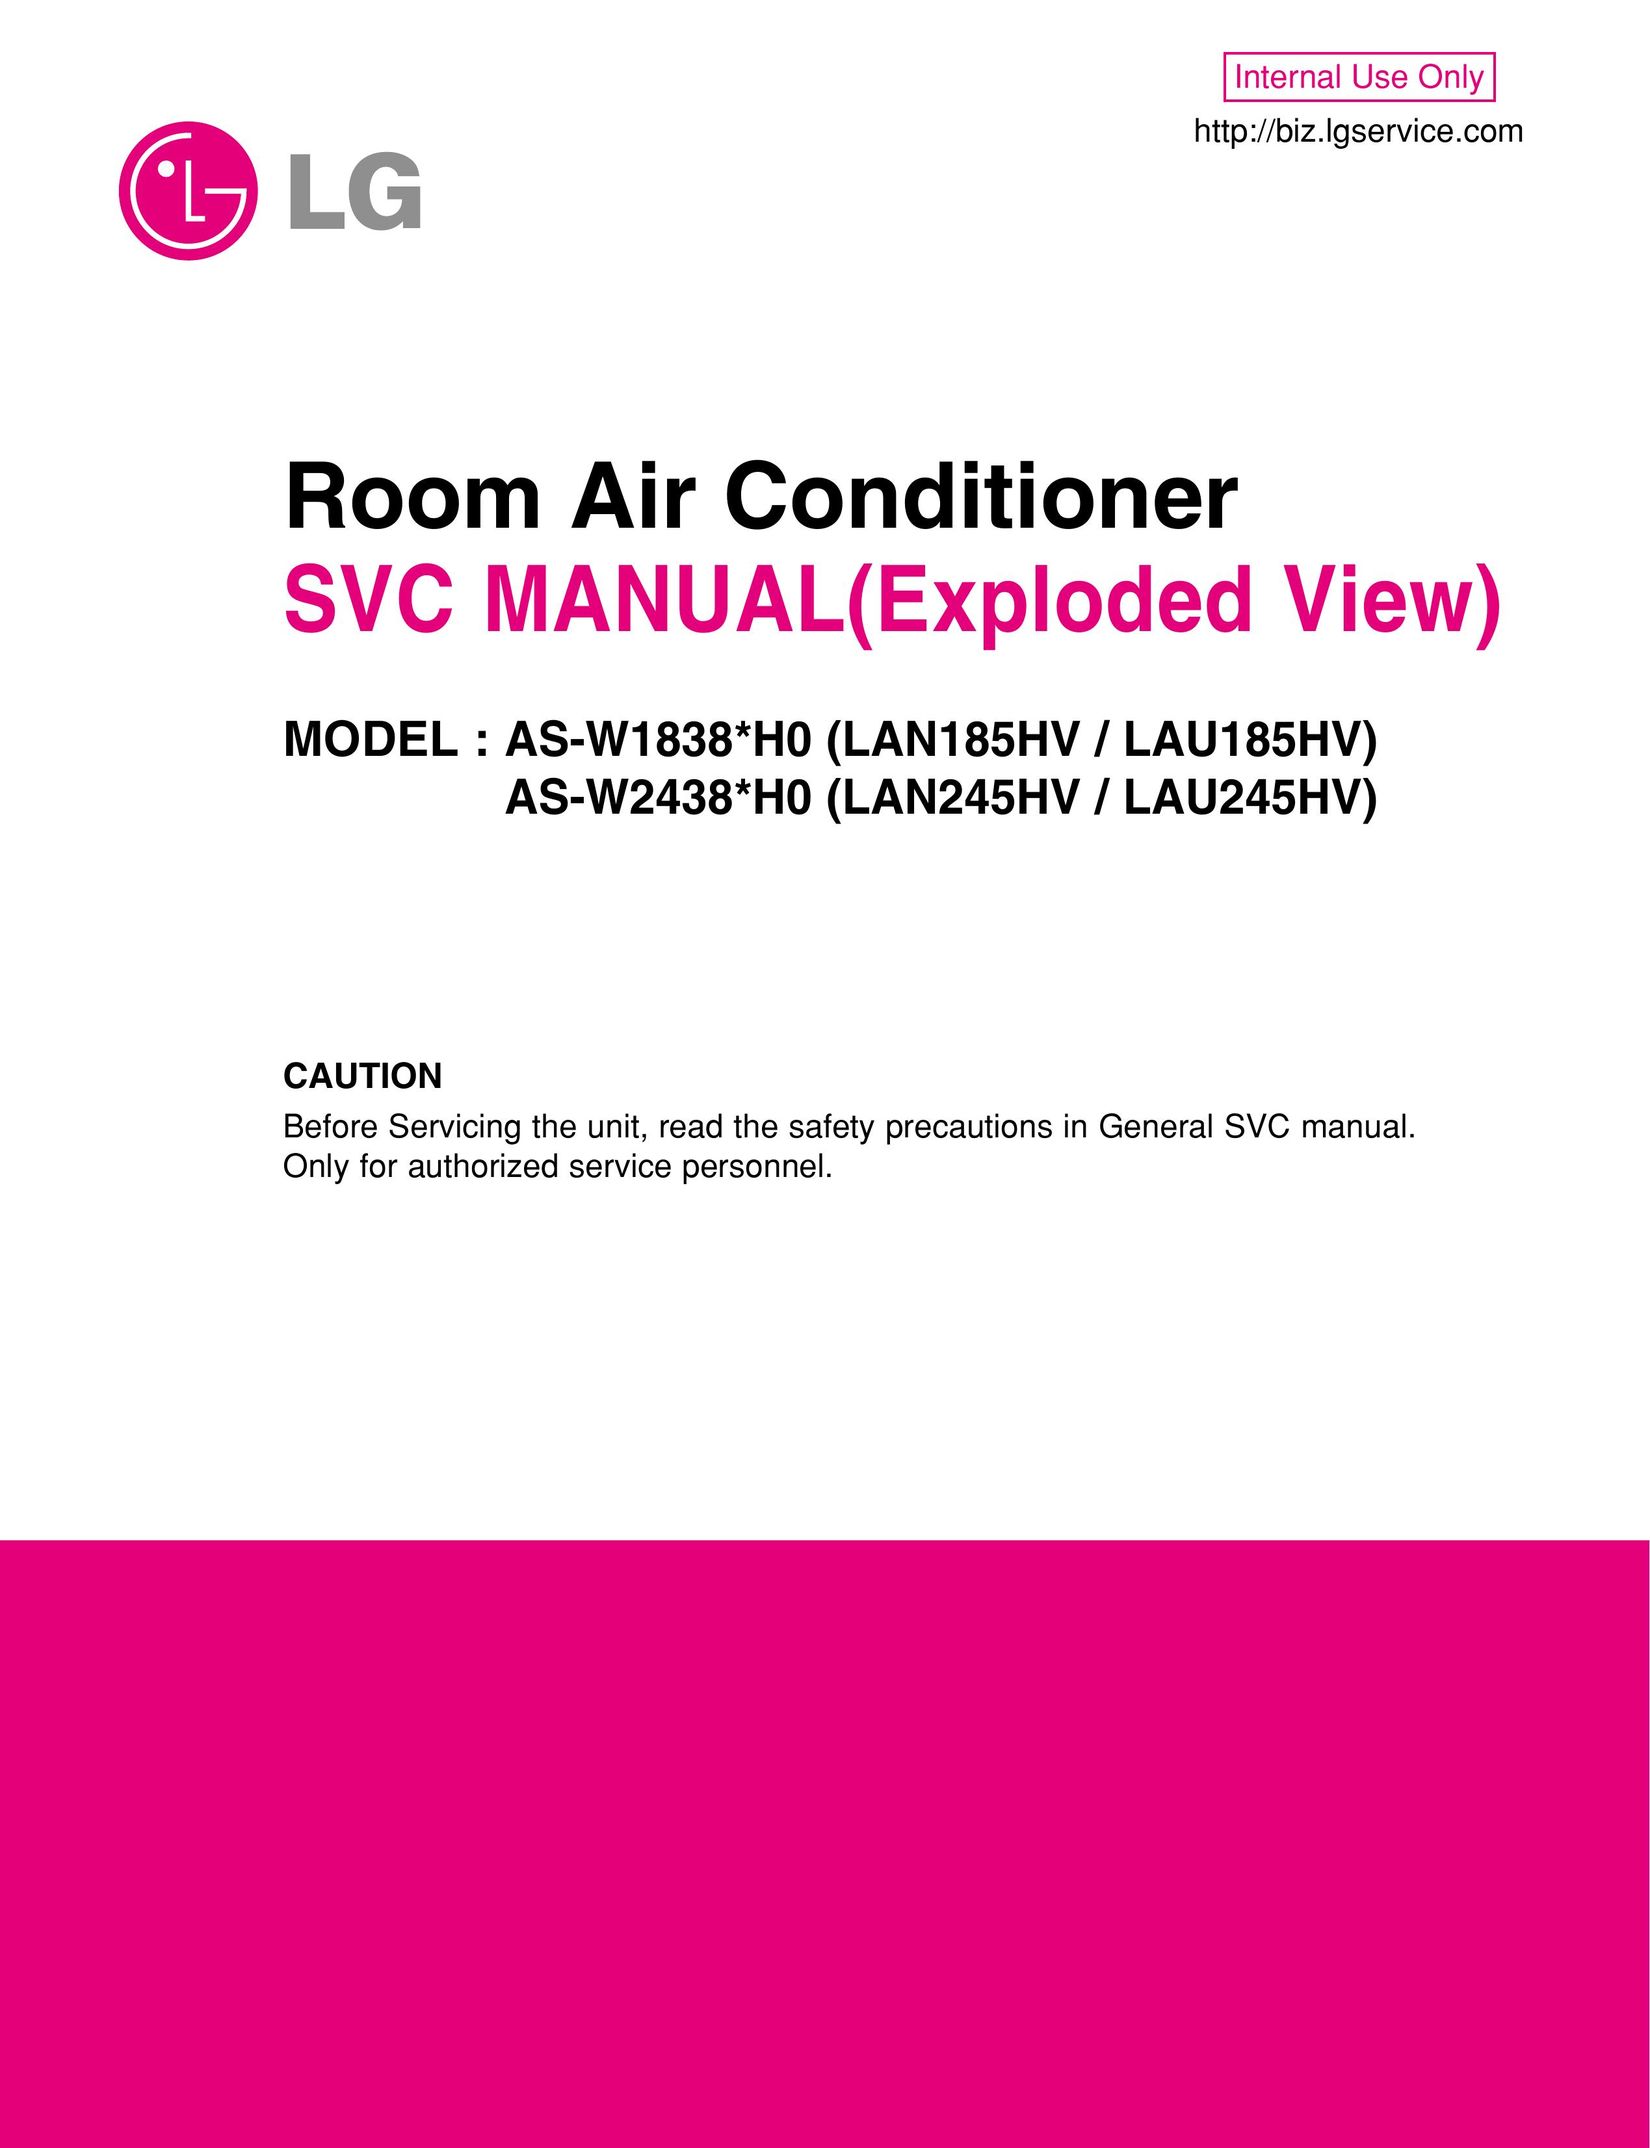 LG Electronics AS-W2438*H0 Air Conditioner User Manual